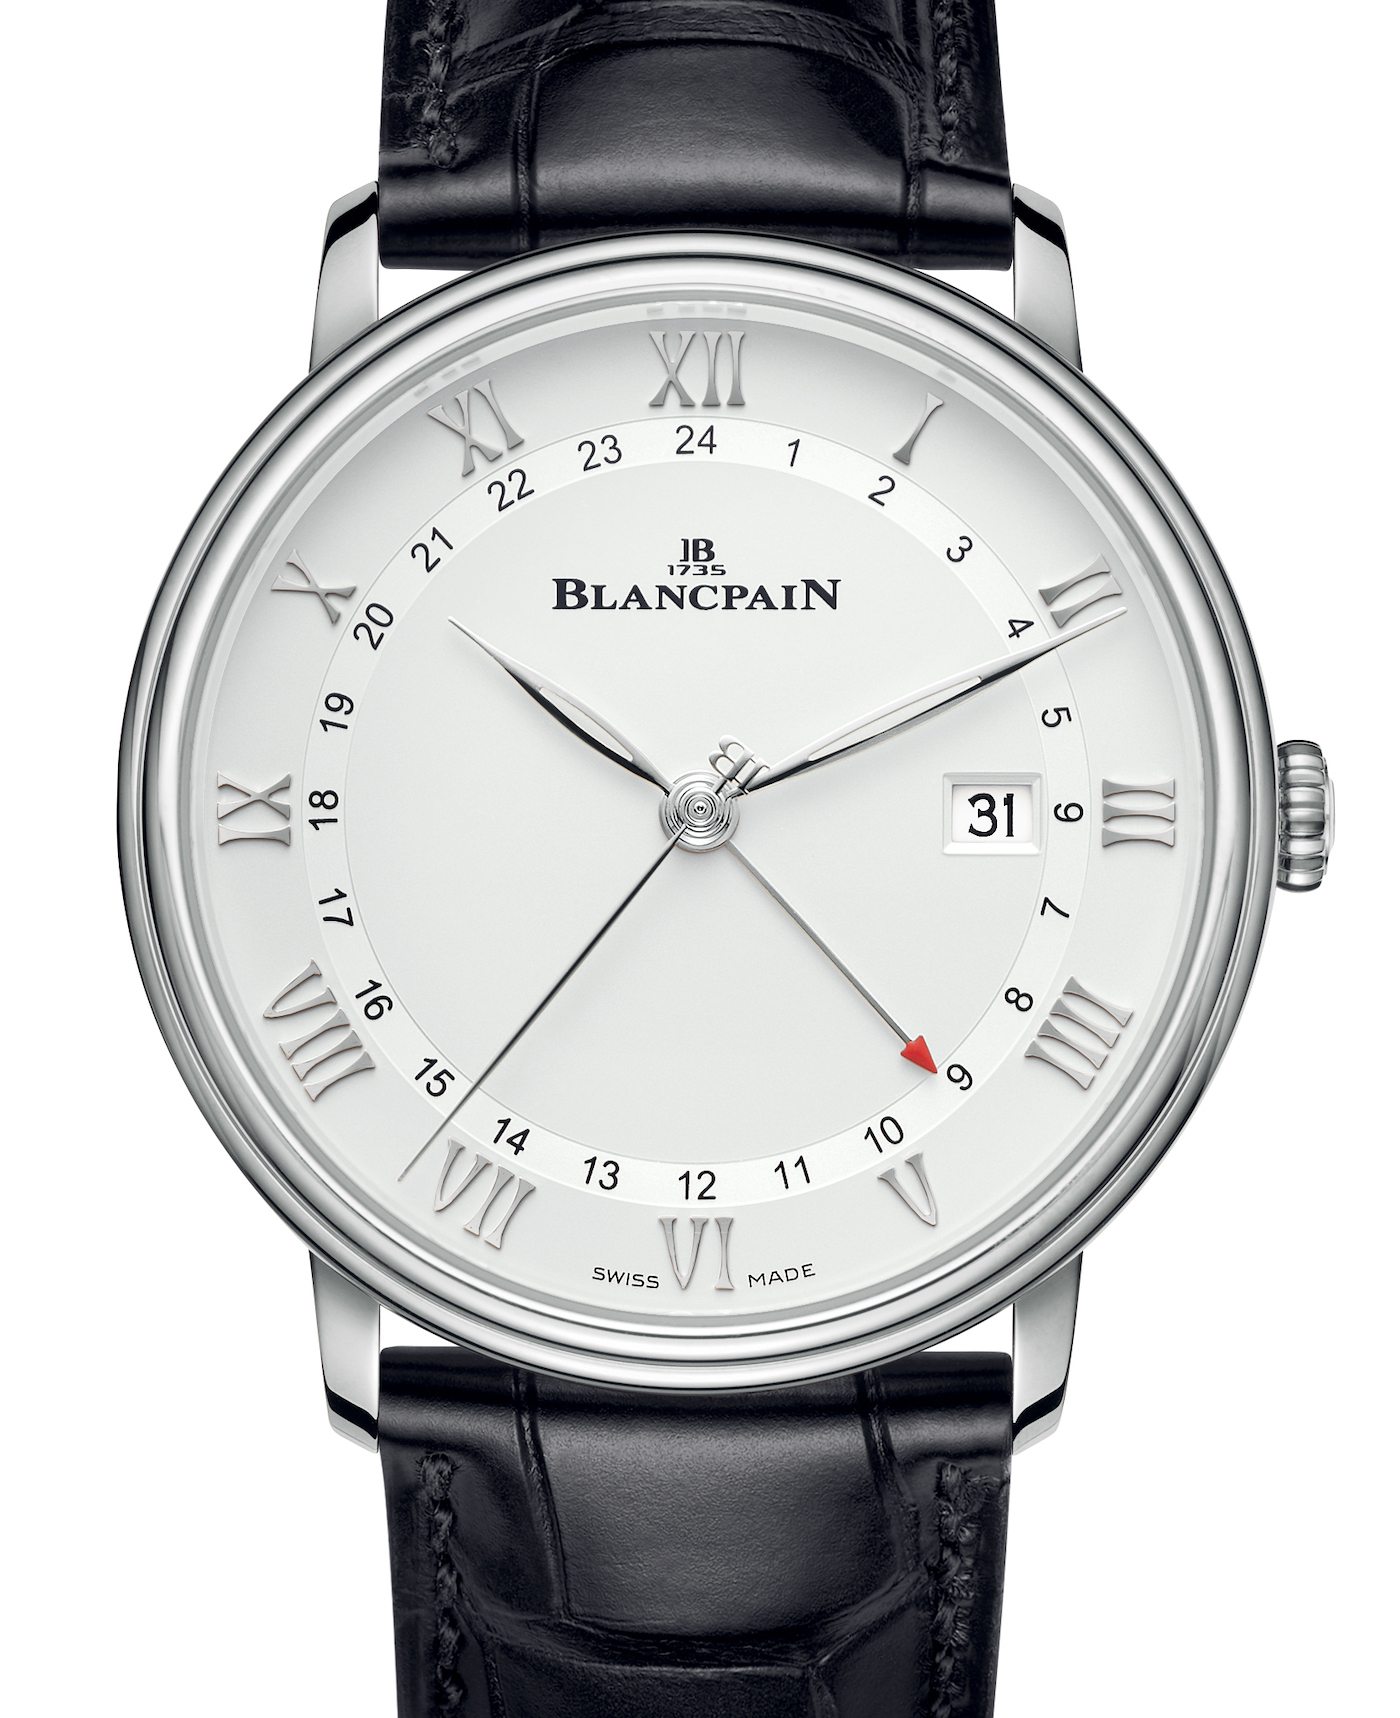 Blancpain Villeret GMT Date fake Watch Offers Multiple Functions In A Pared-Back Package